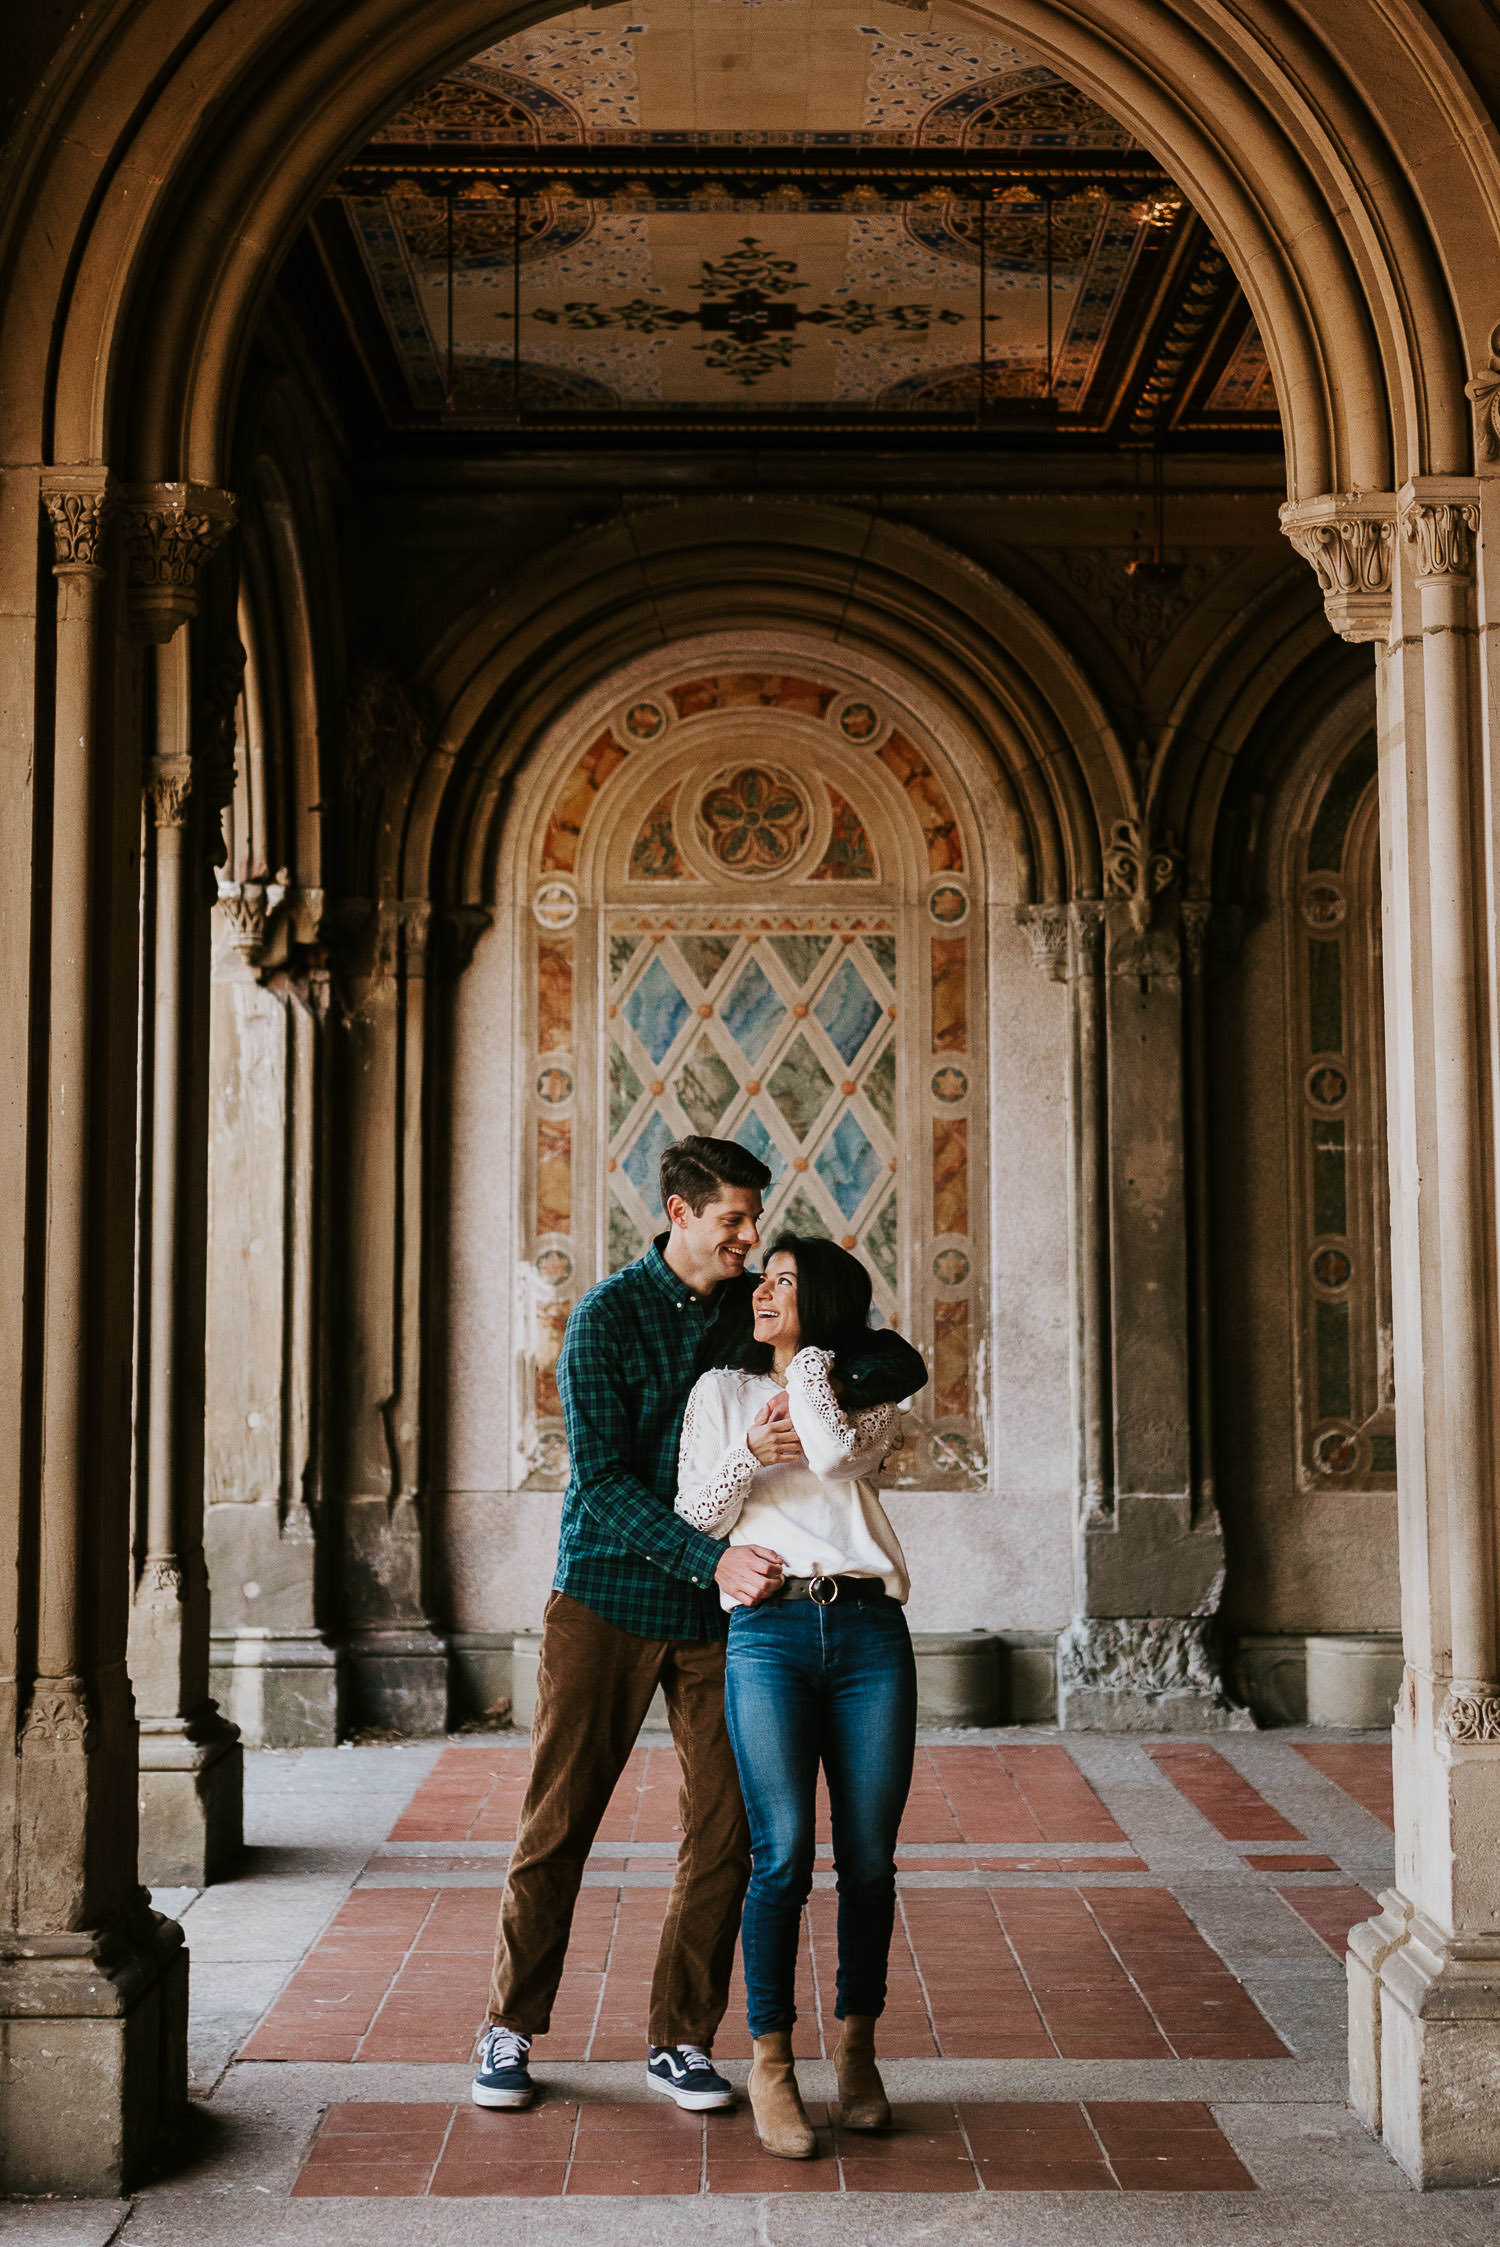 engaged couple hugging in bethesda terrace in central park in nyc